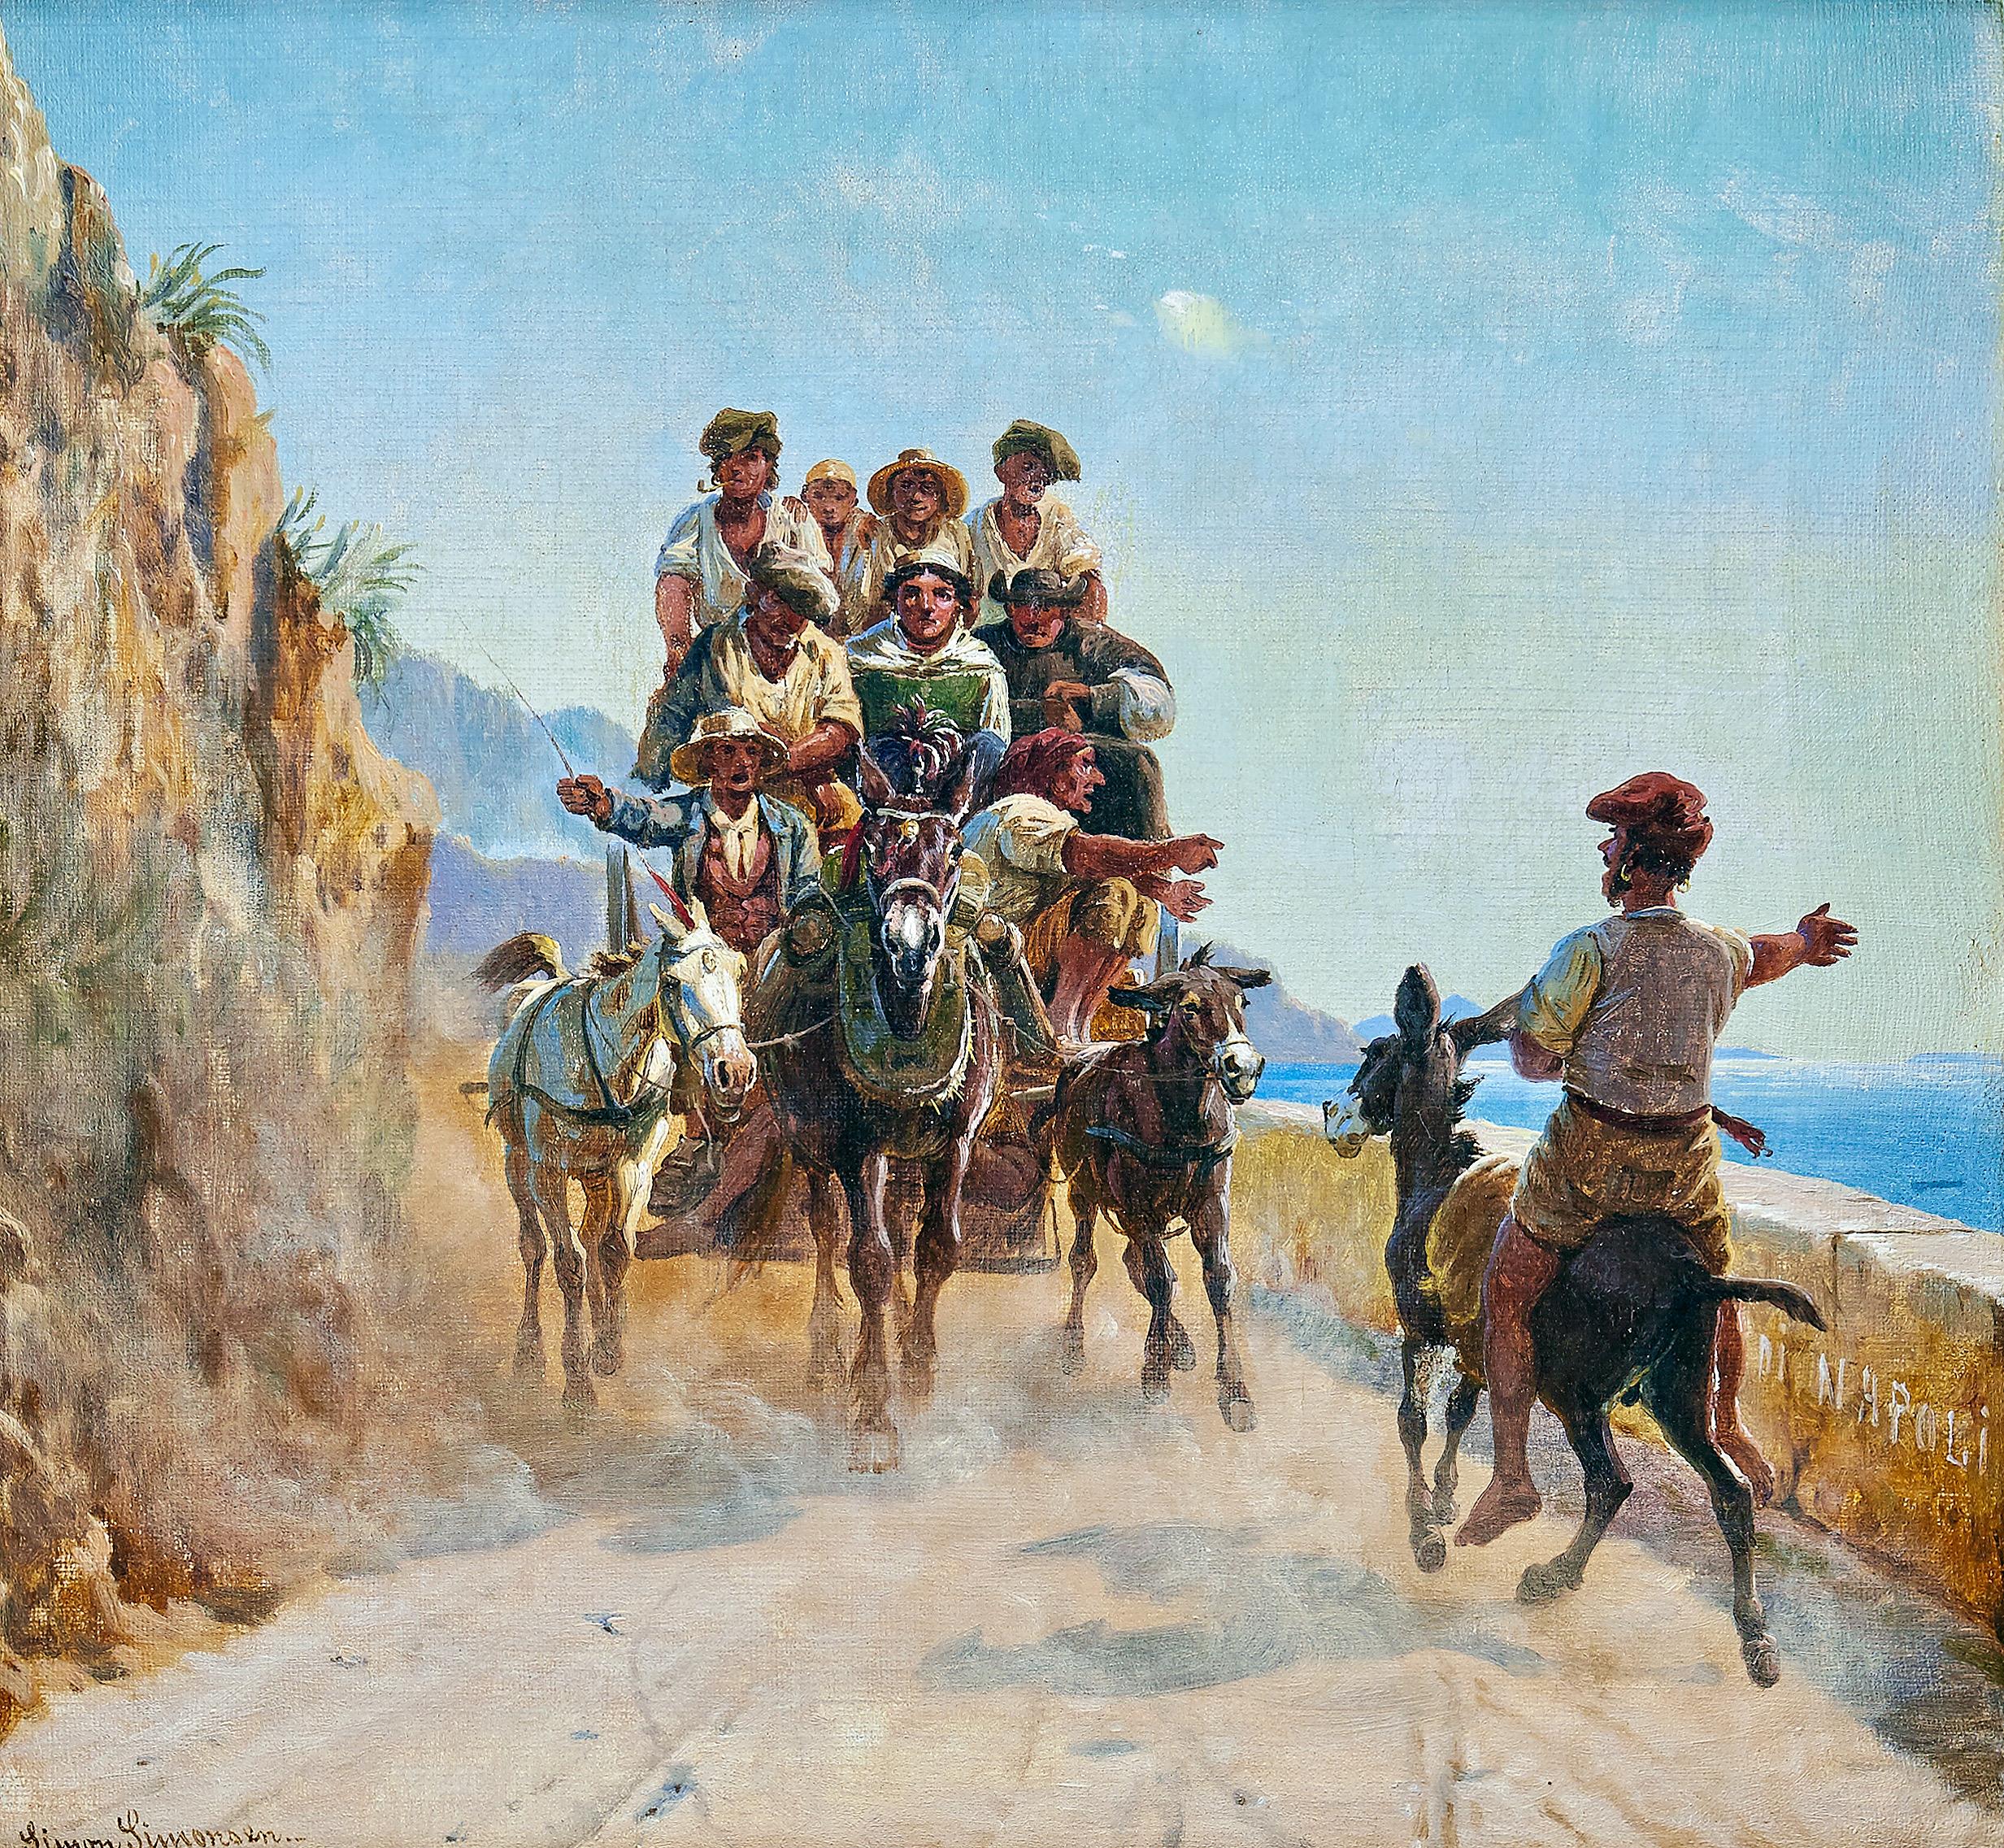 A fine painting by Simon Simonsen (1841-1928) of a scenic view from the Bay of Naples with villagers on a wagon riding on a coastal road. Signed. Oil on canvas. The canvas mounted in a period giltwood frame.

Simon Ludwig Detlev Simonsen was born